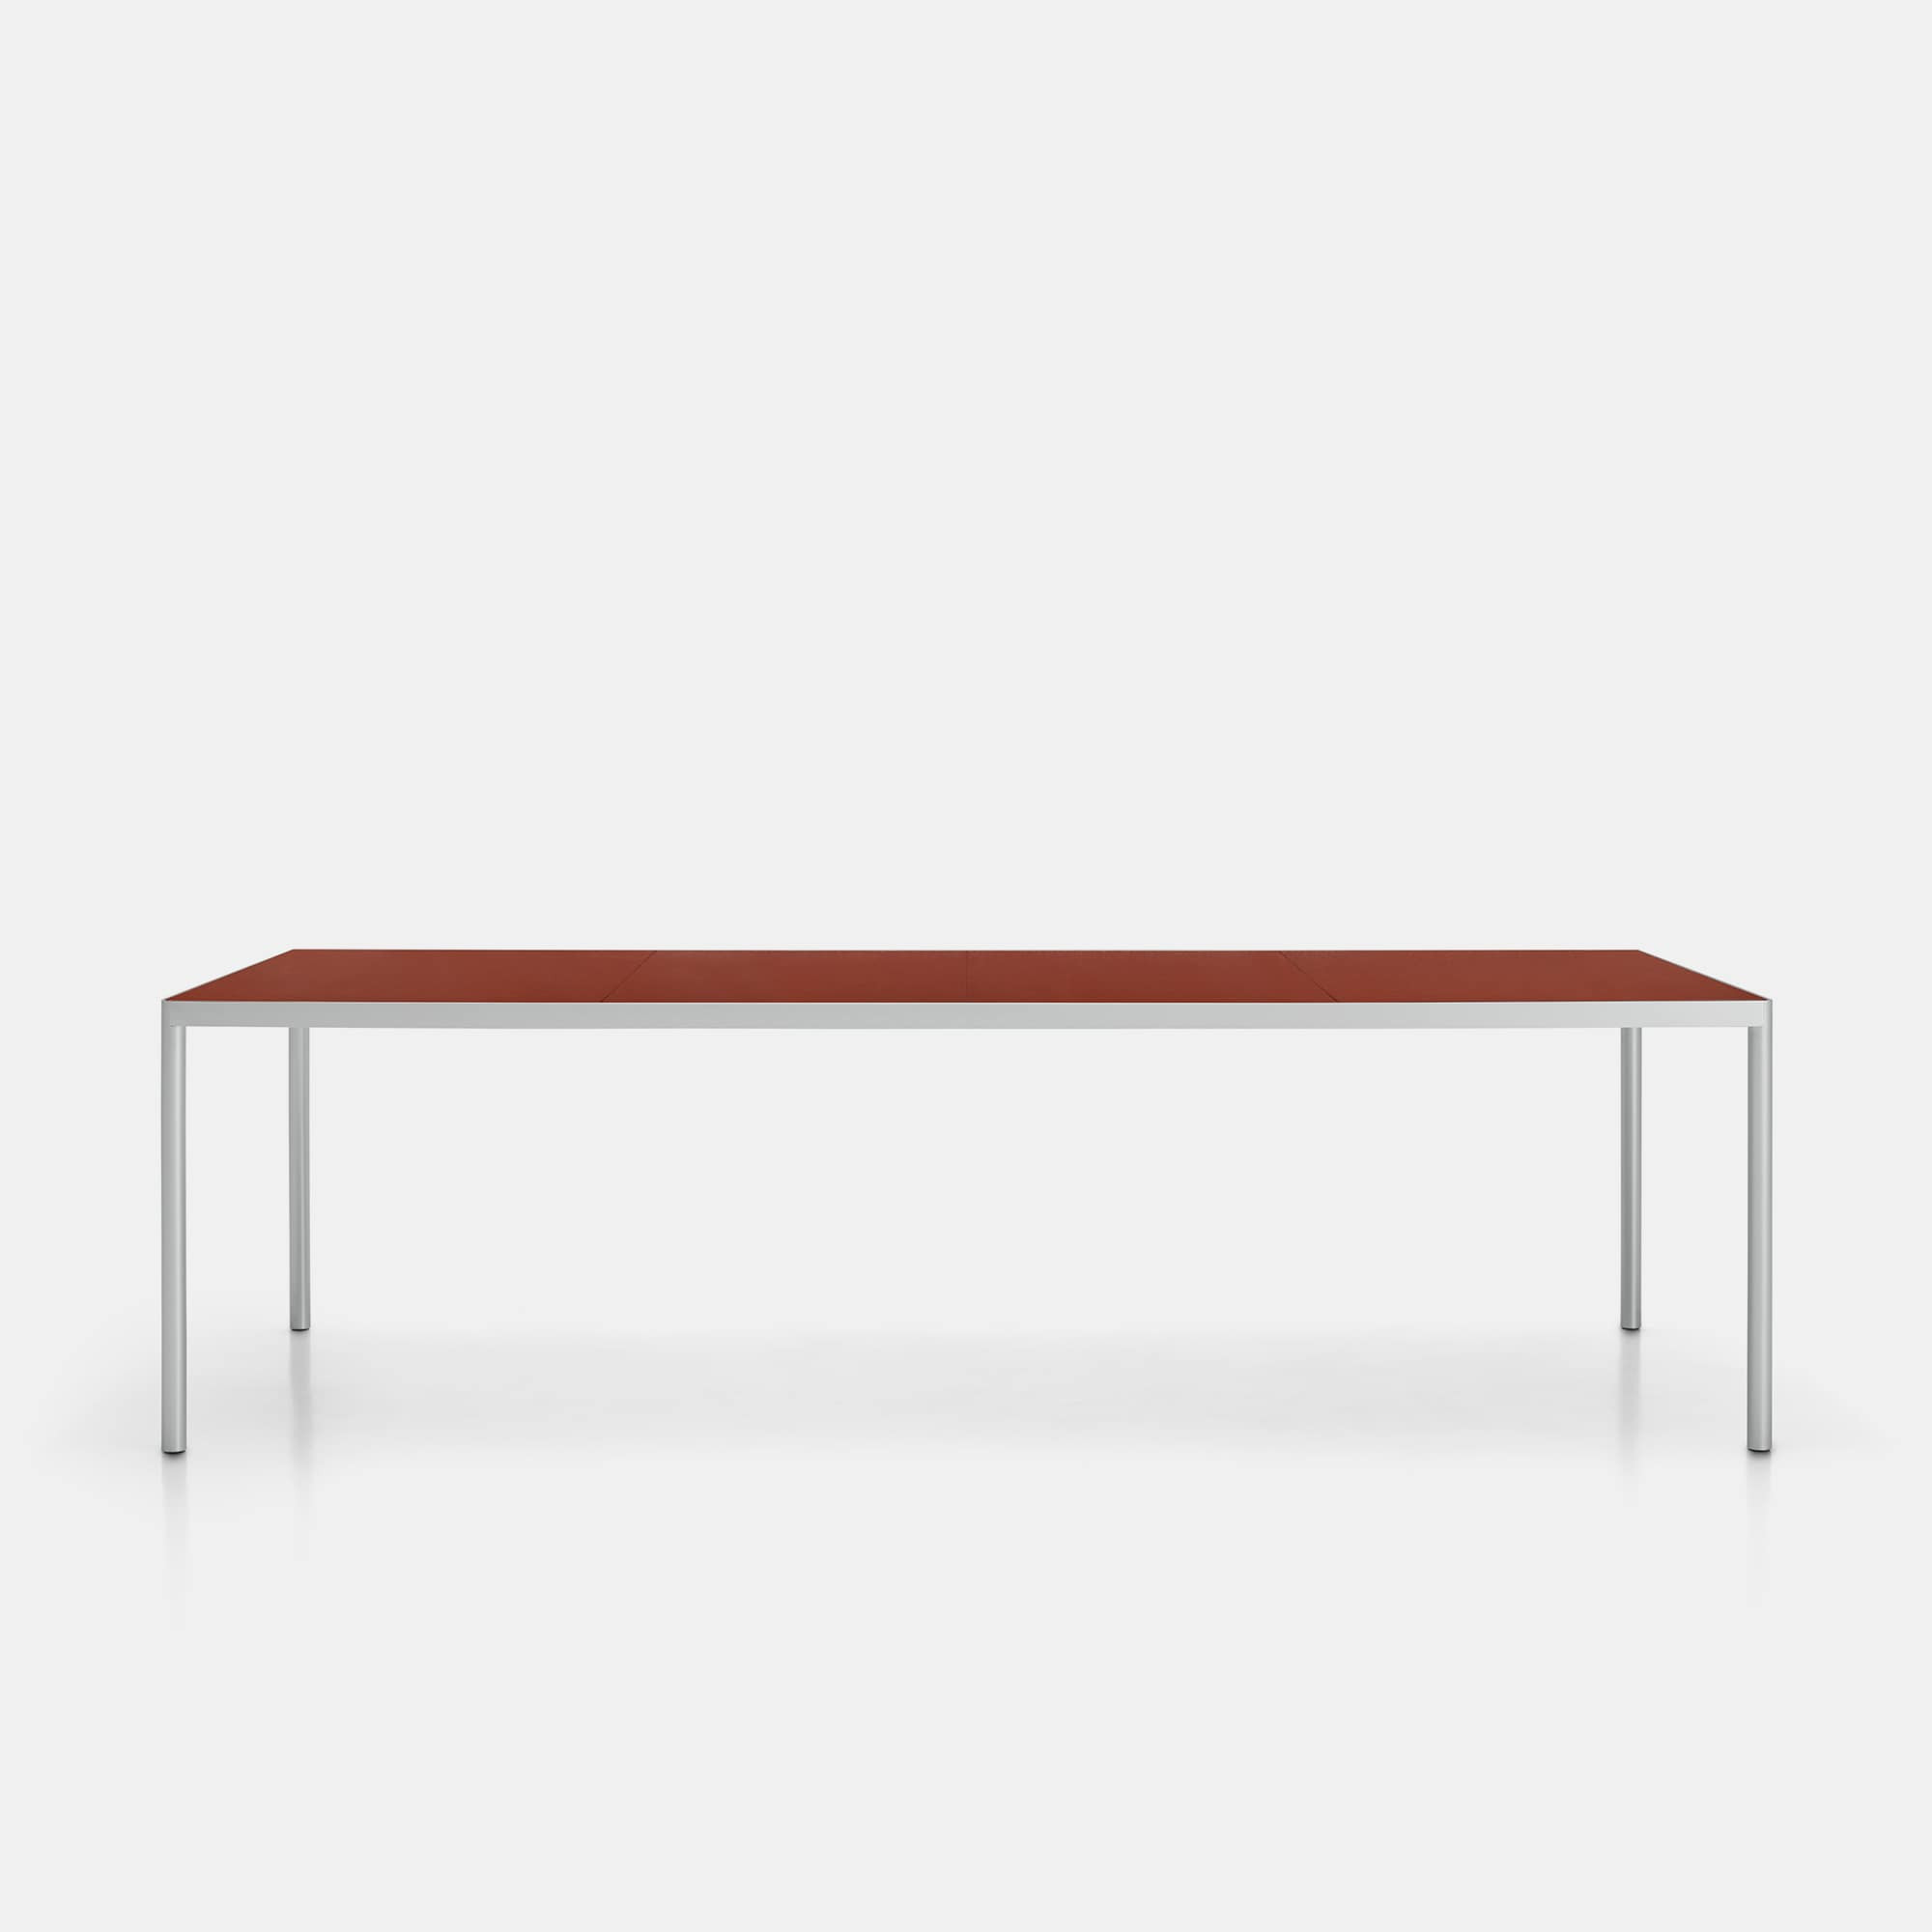 Offset Indoor / Outdoor Table ☞ Use: Indoor ☞ Structure: Brushed Anodised Aluminium X137 ☞ Top: Reconstructed Stone White Calce X131